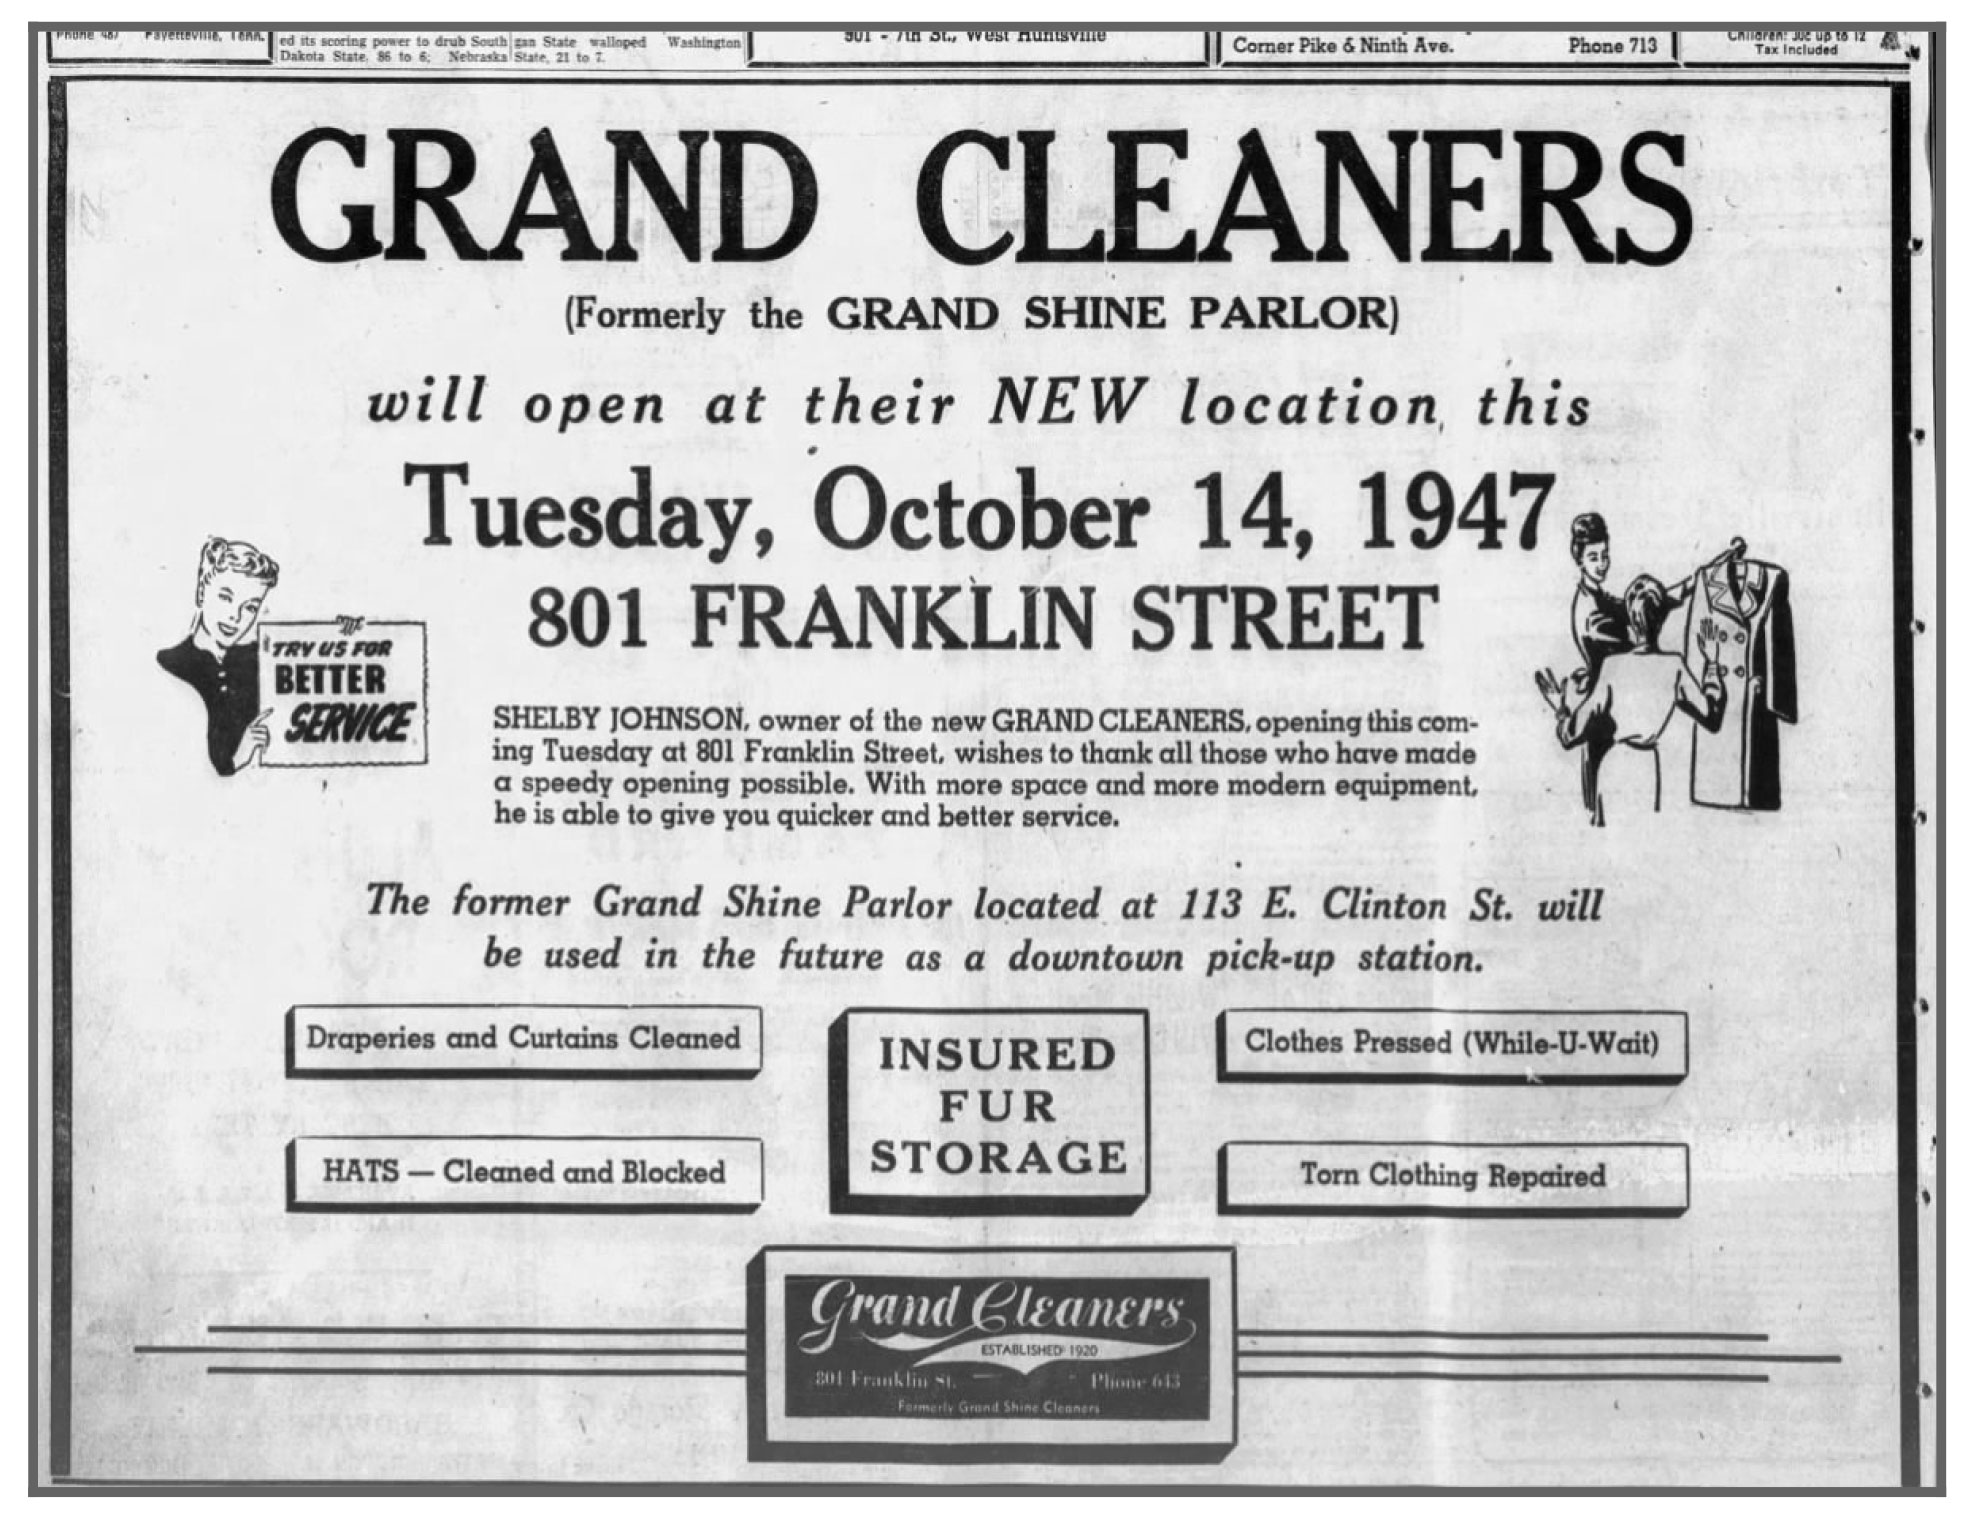 The newspaper ad announcing the opening of Grand Cleaners at 801 Franklin Street.